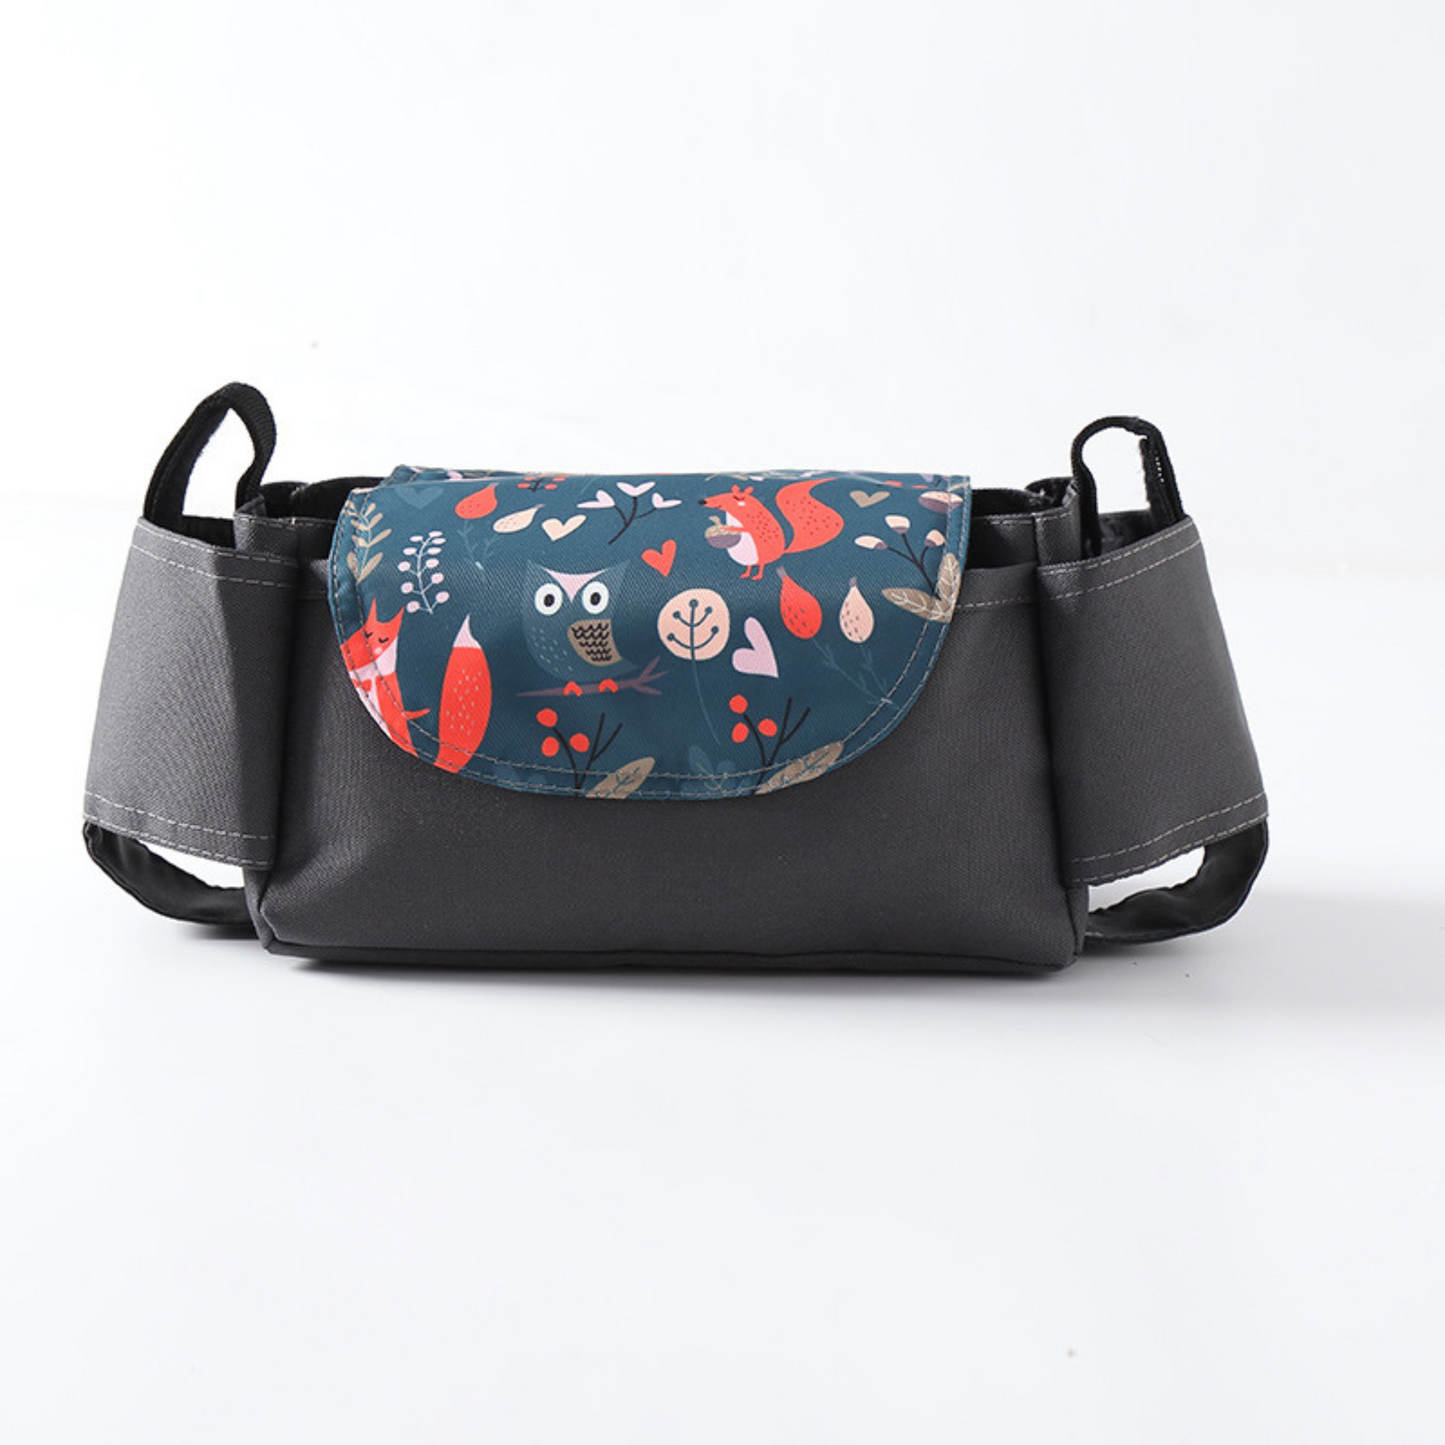 black stroller organizer bag and cup holder with woodlands animals print on a white background